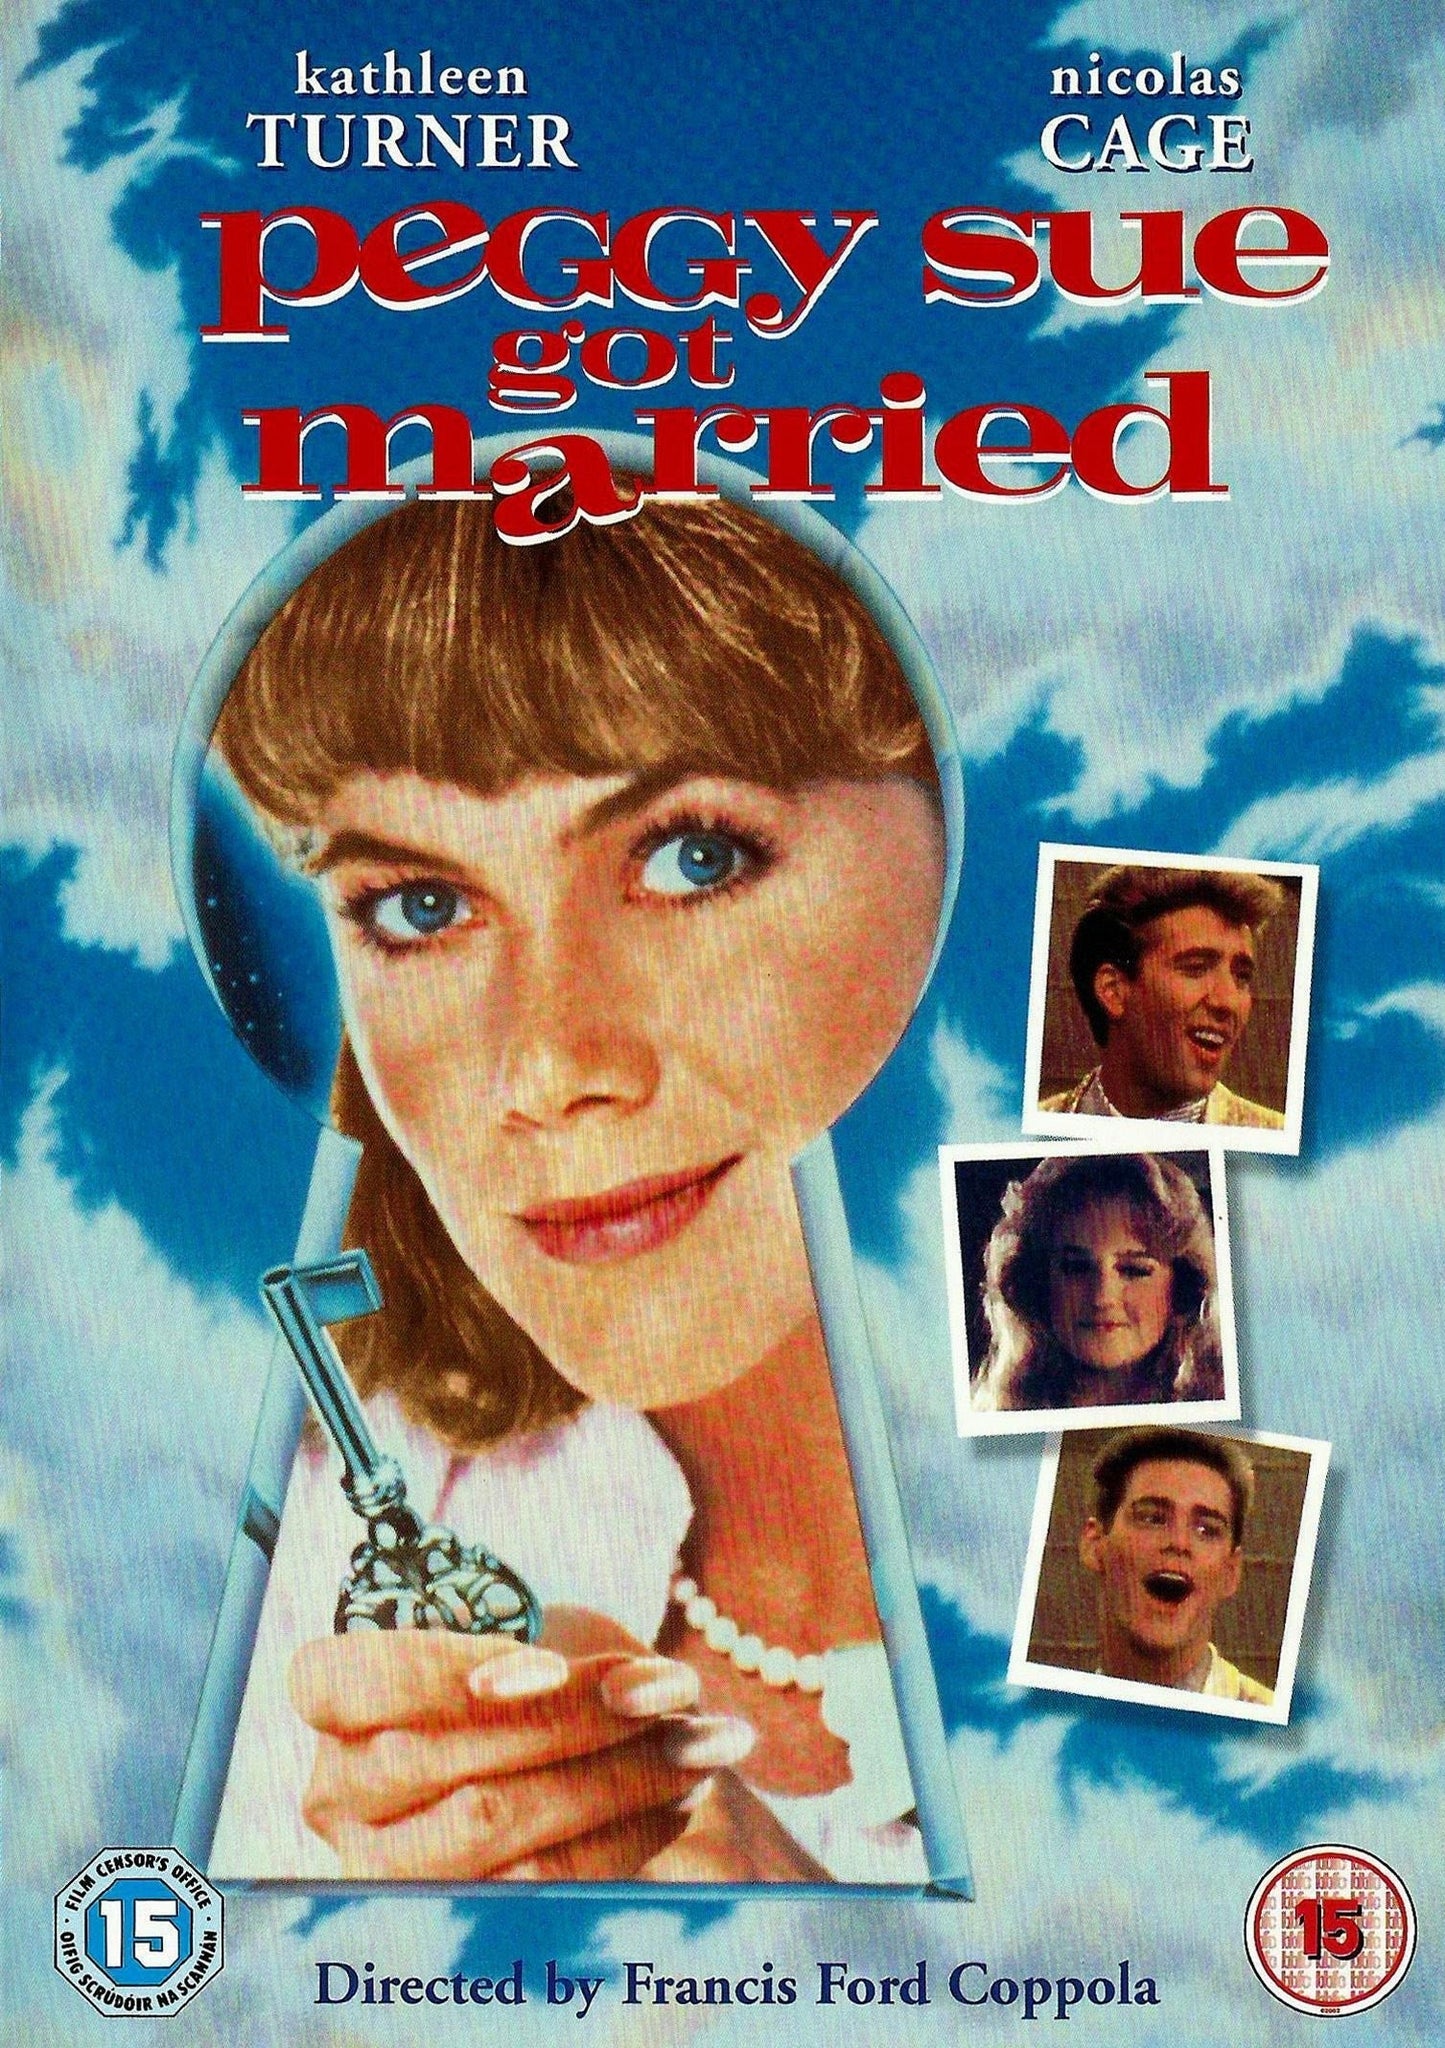 Peggy Sue Got Married rareandcollectibledvds